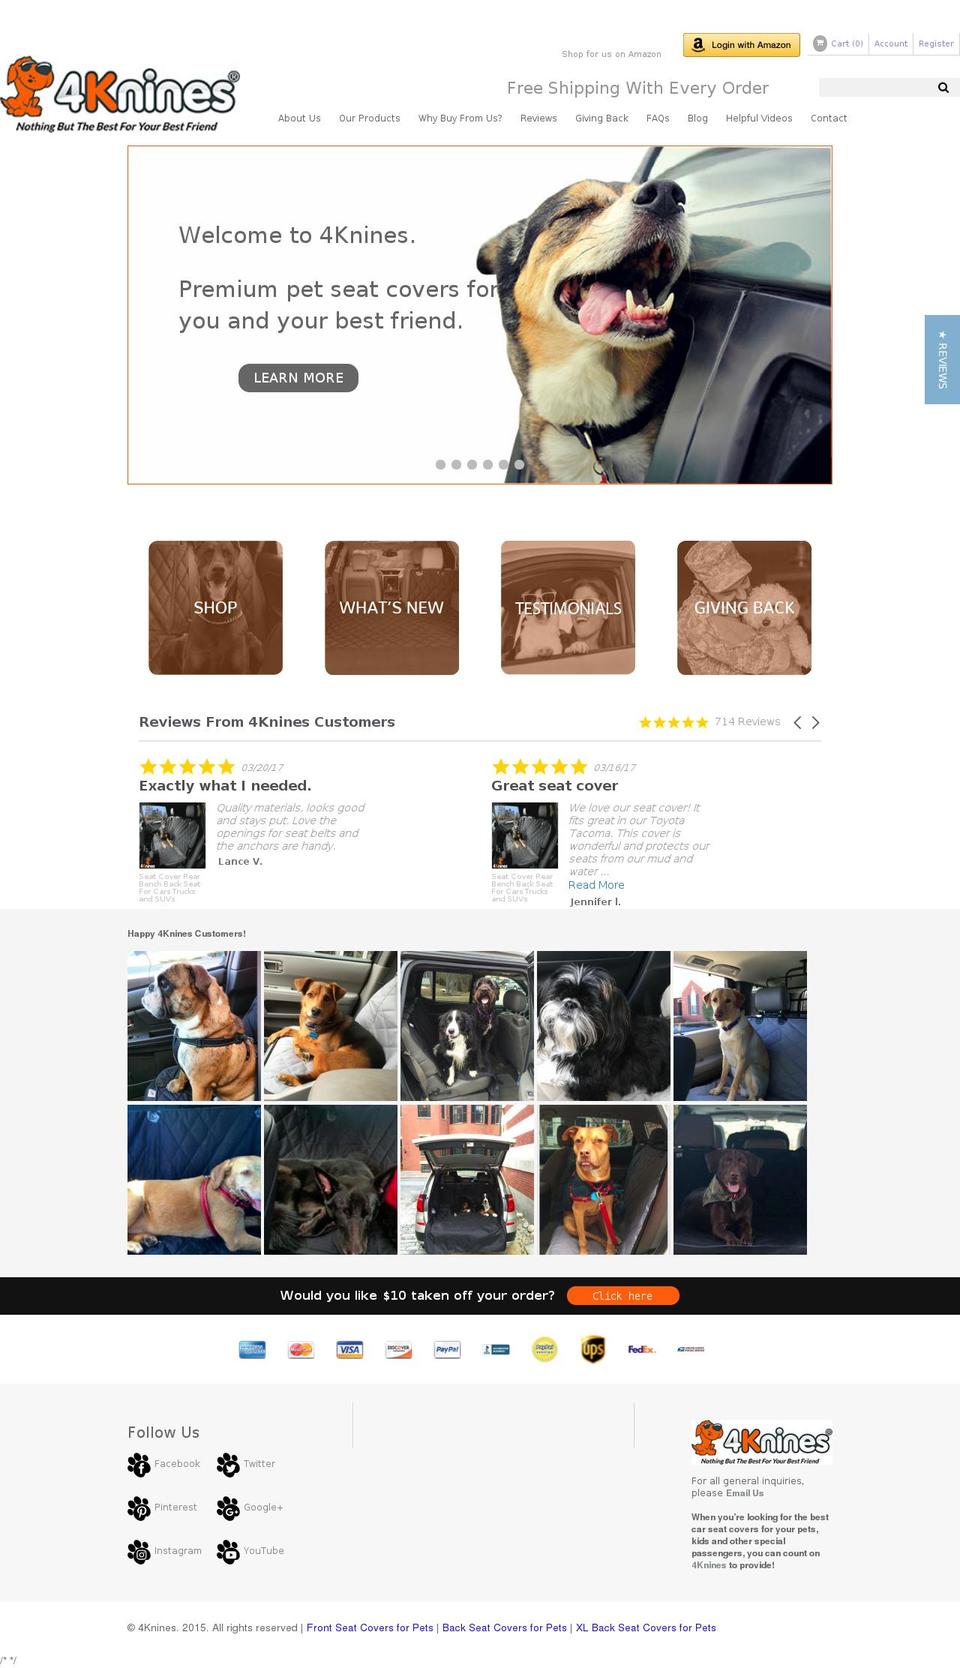 Boost Shopify theme site example 4knines.com